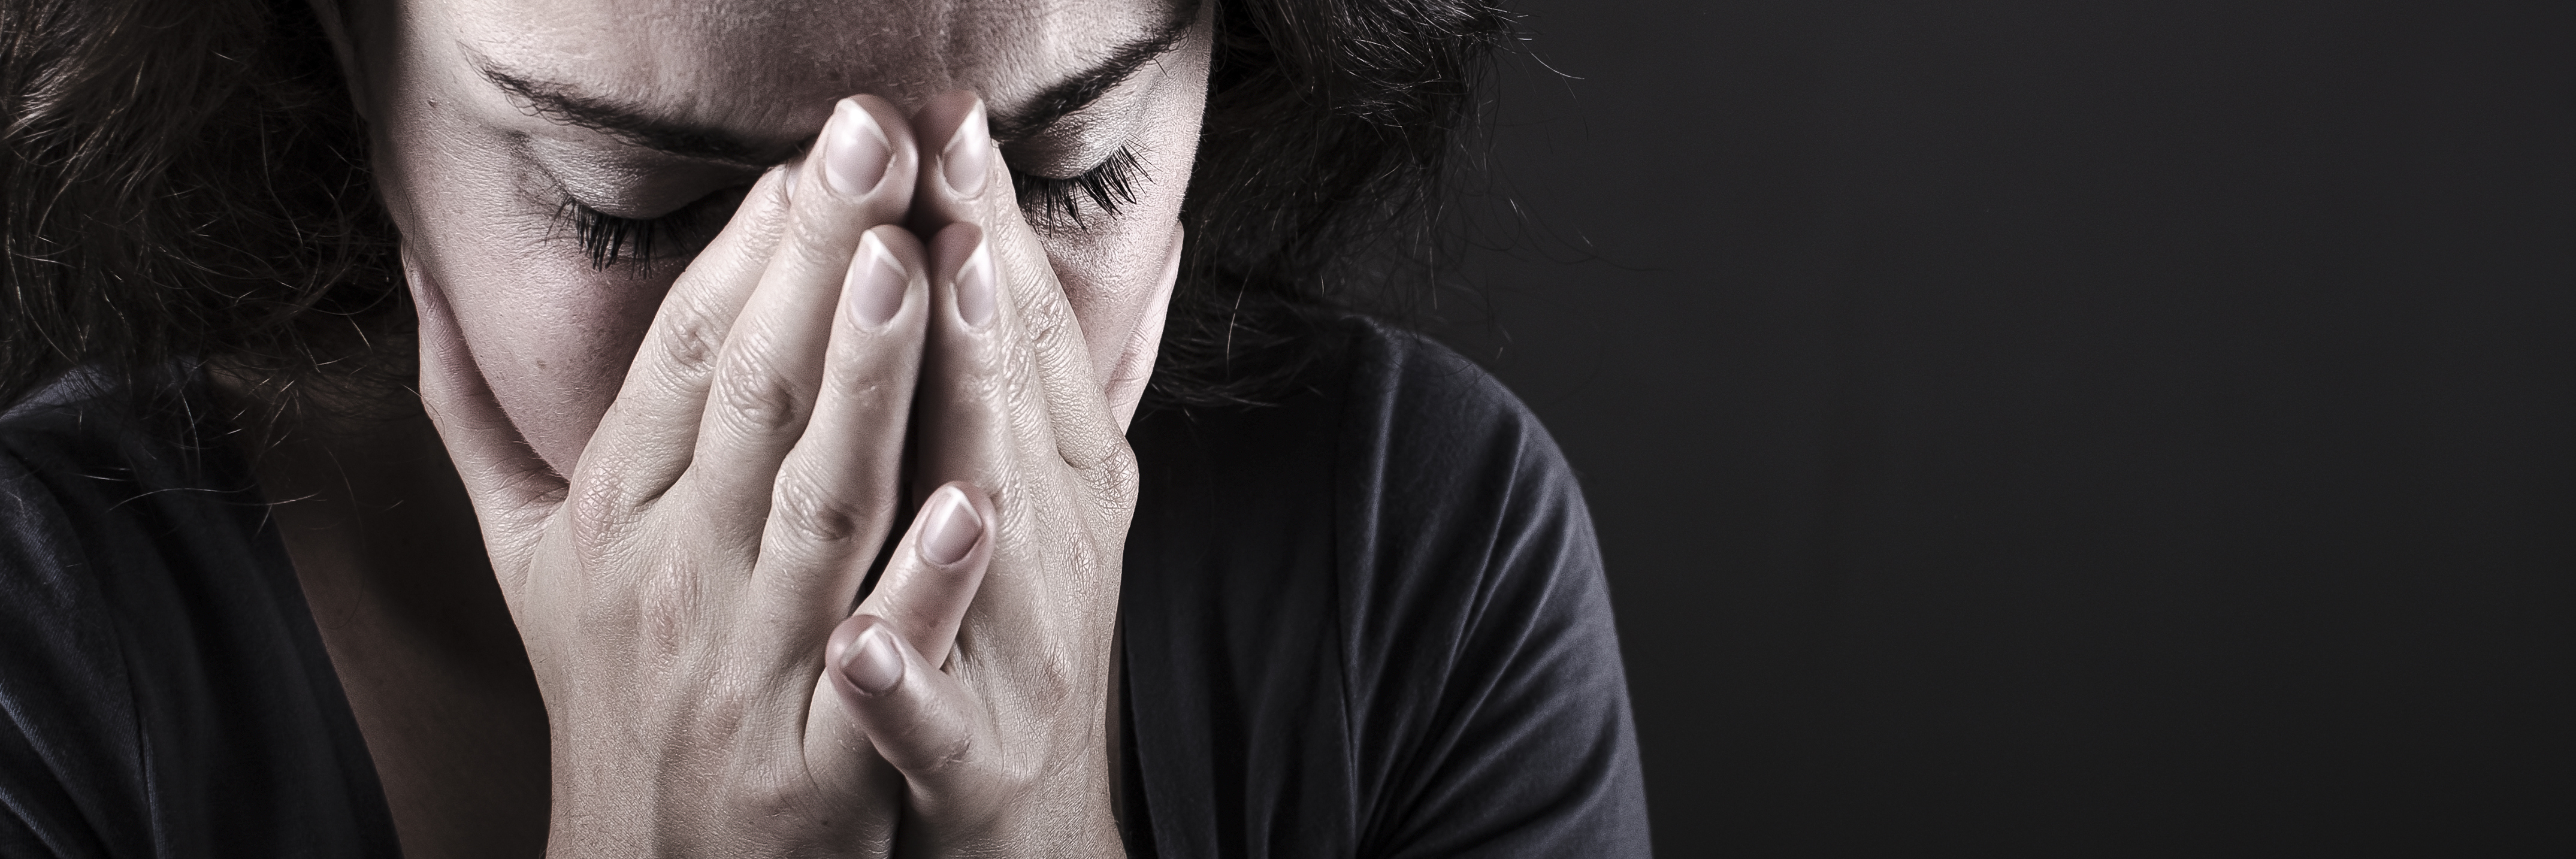 woman on dark background looking scared or depressed with hands covering face